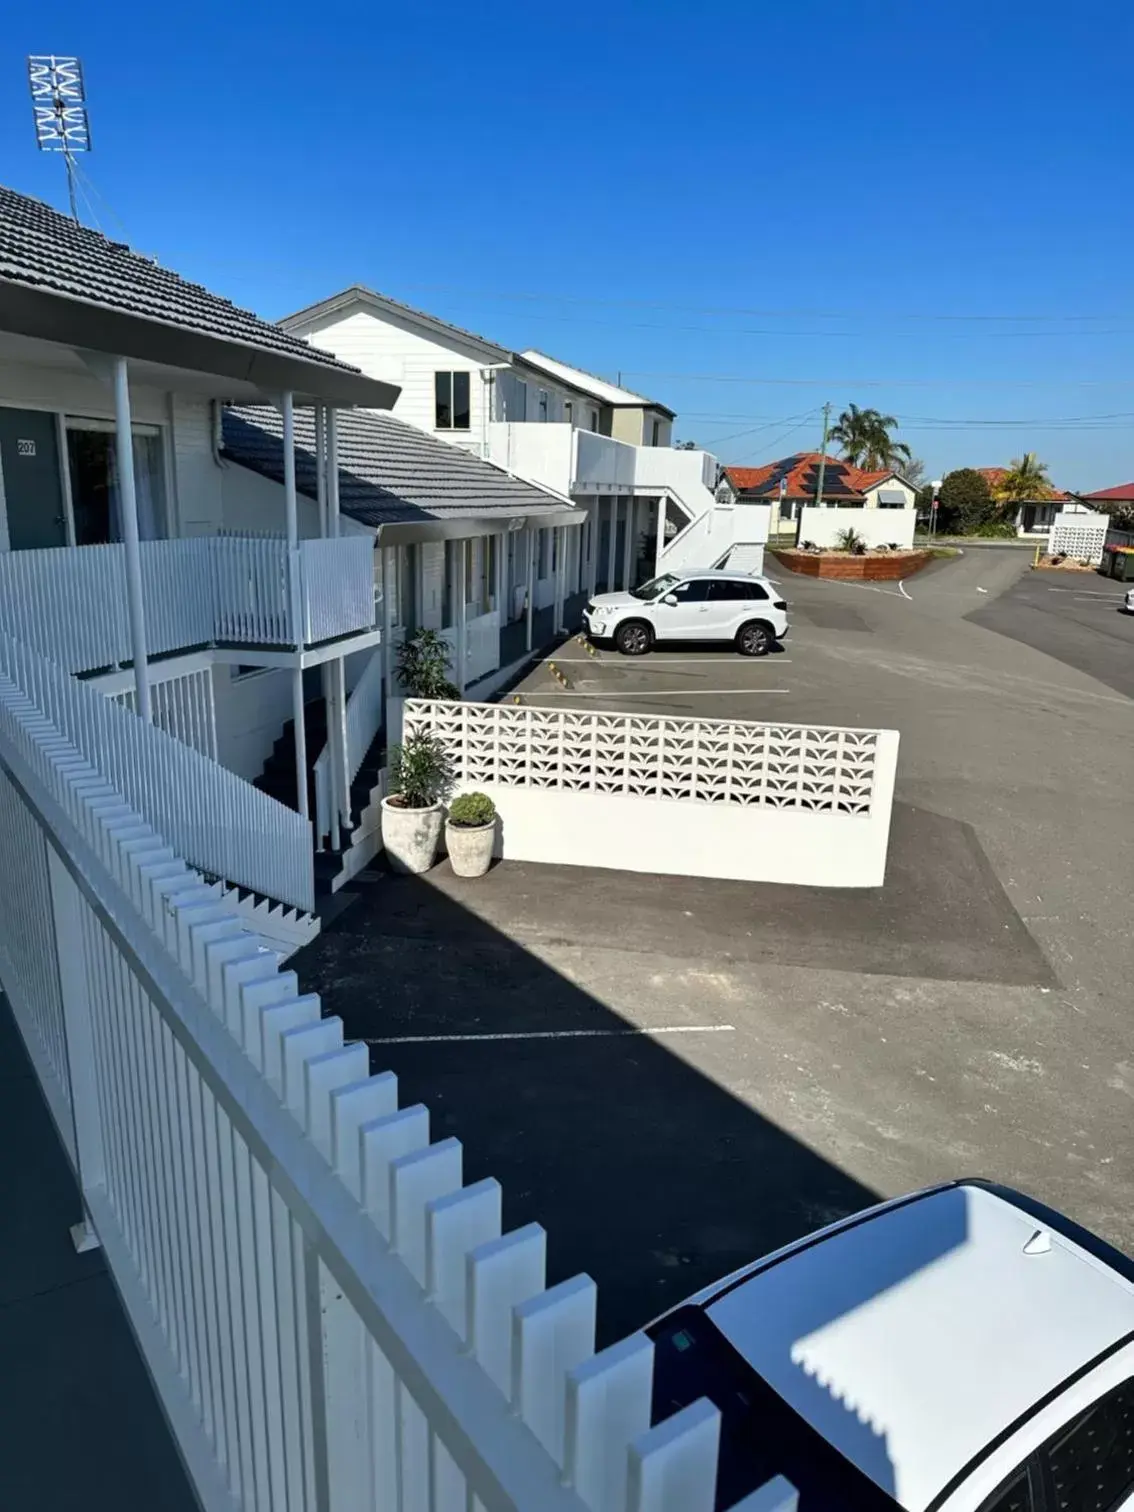 Property Building in Surf Beach Motel Newcastle